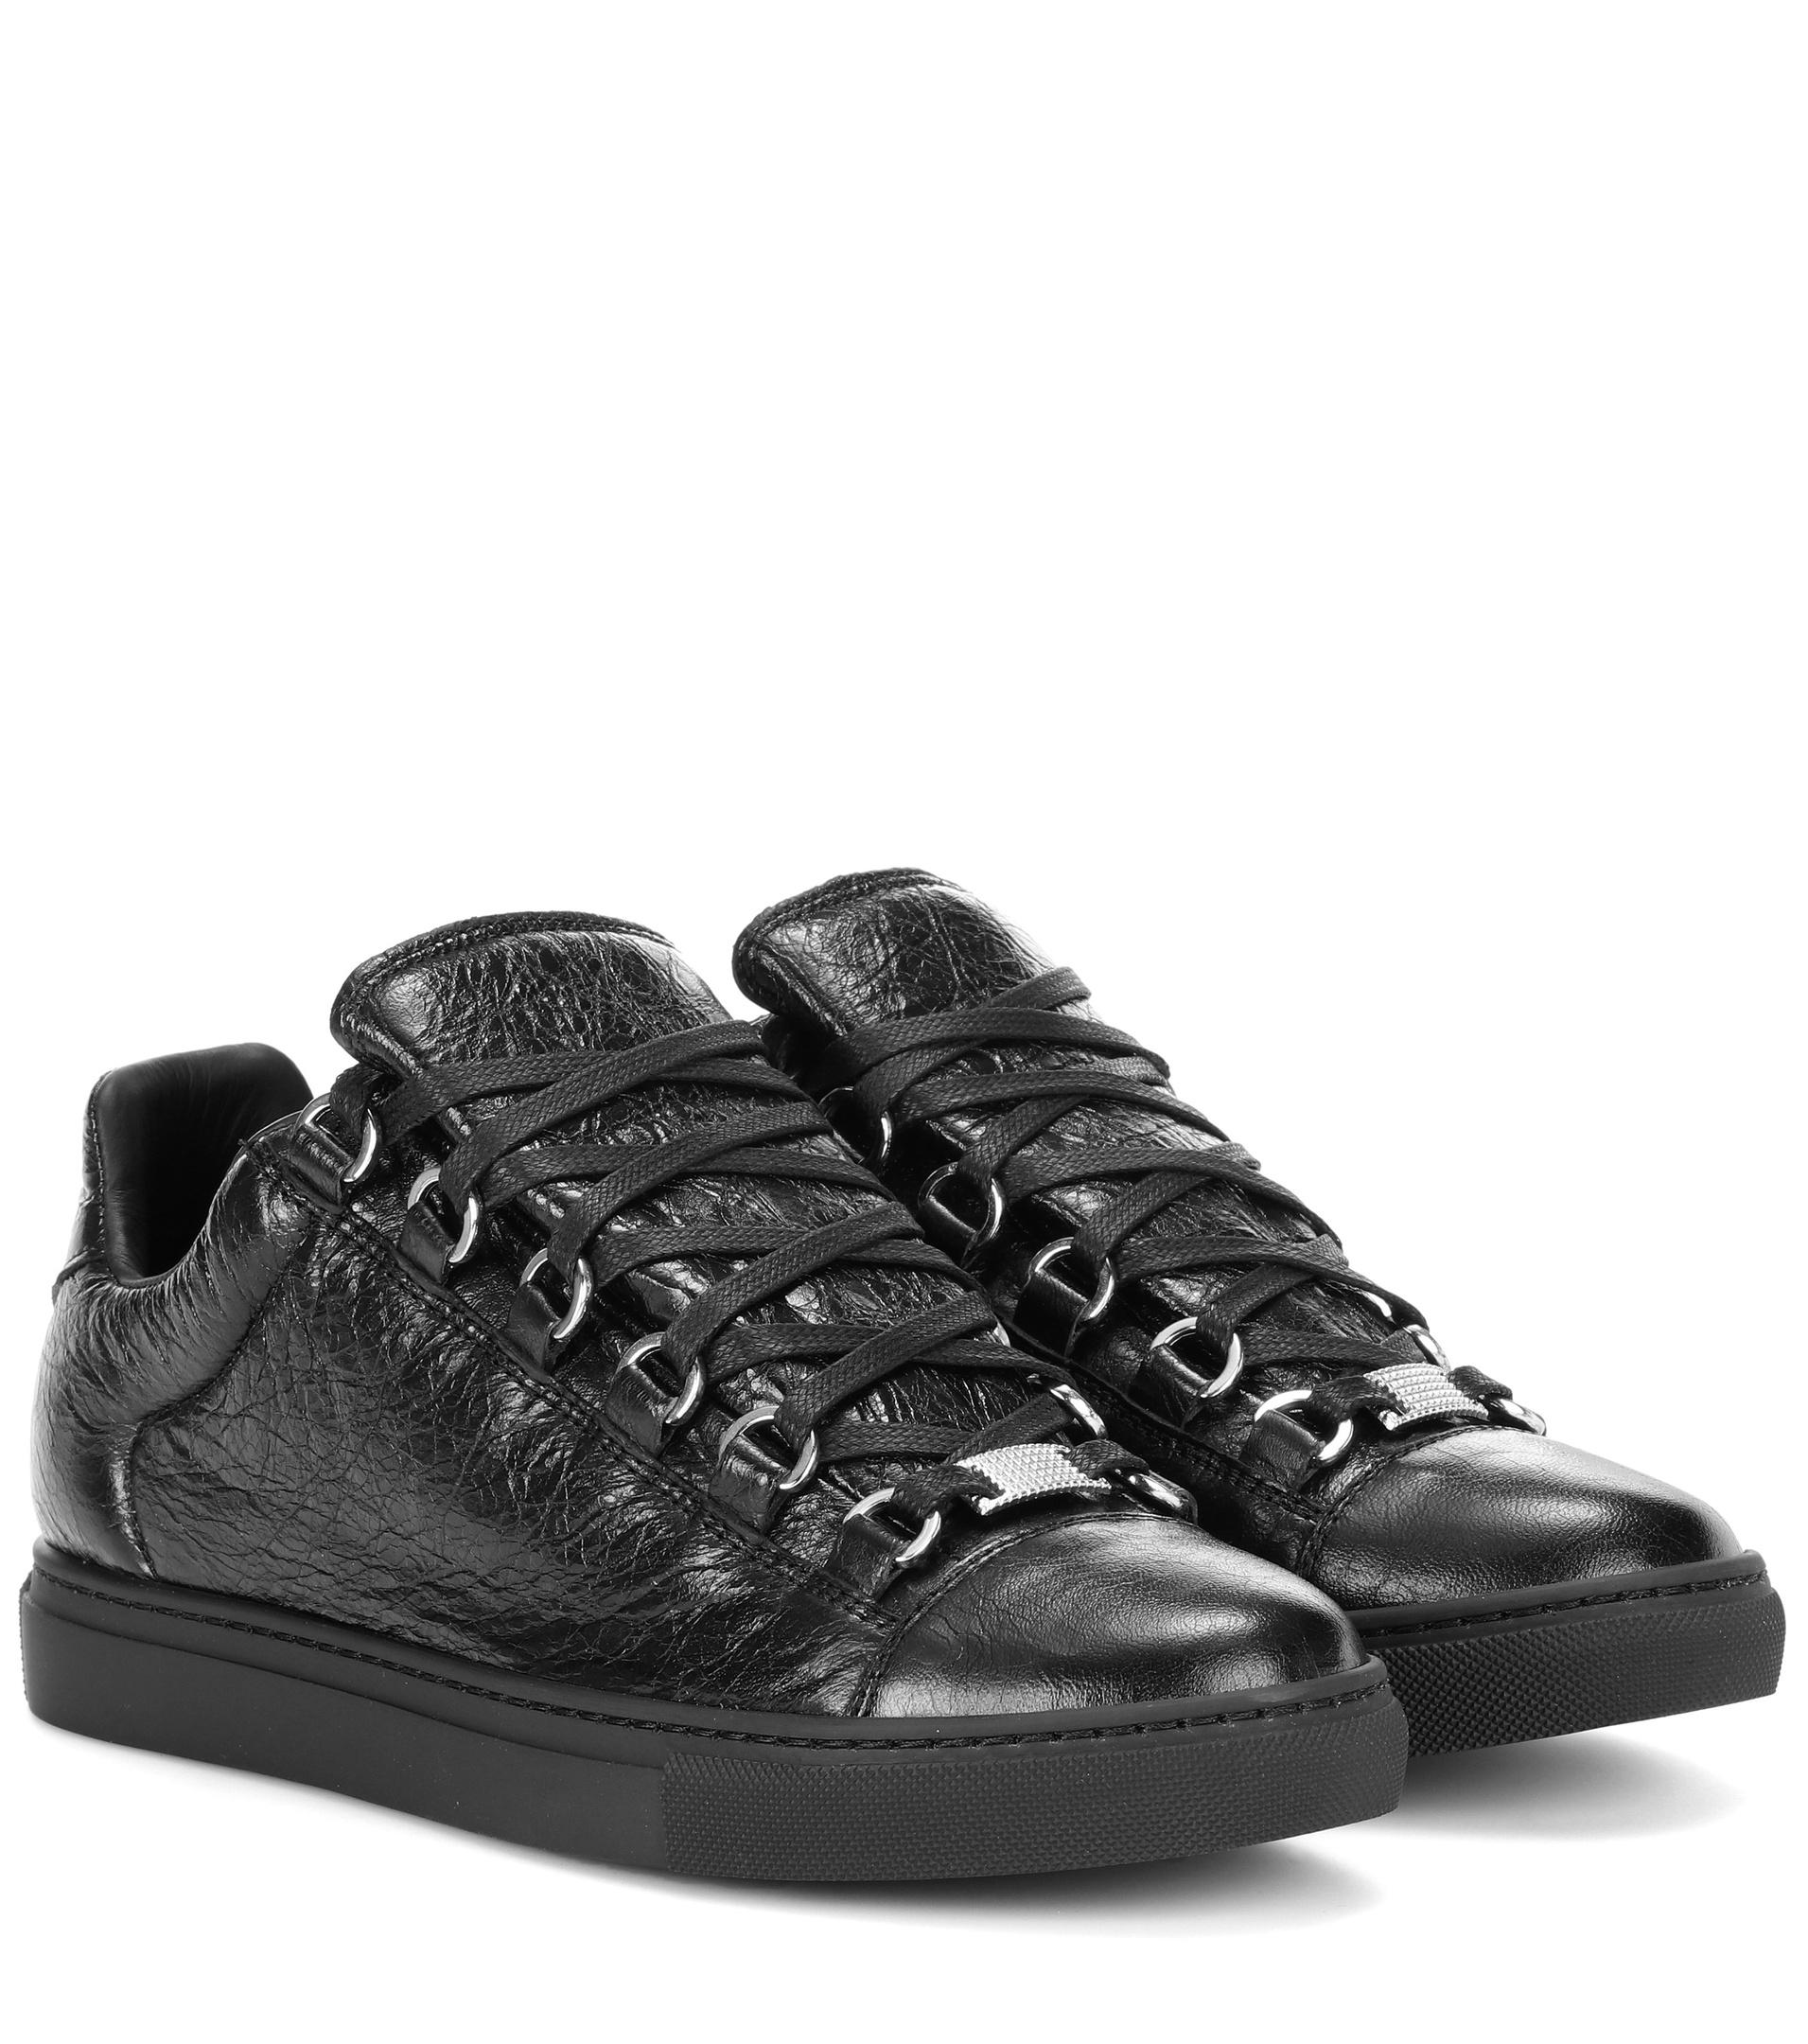 Balenciaga Leather Arena Low-top Sneakers in Black - Lyst